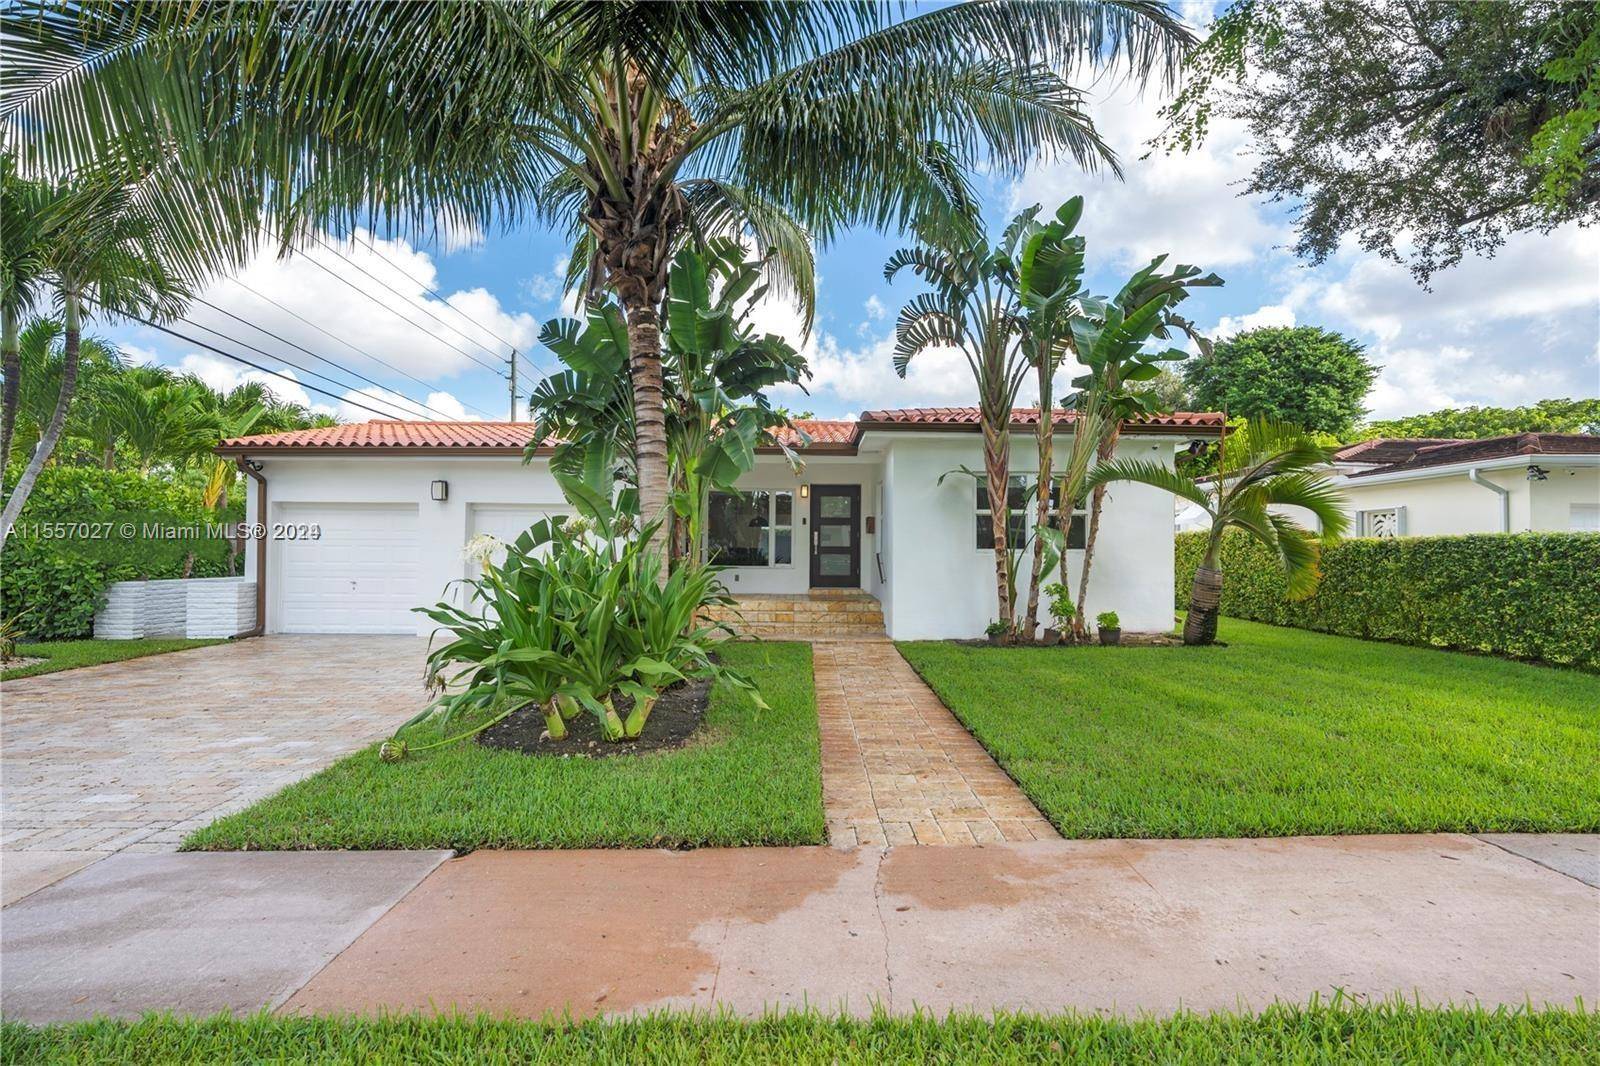 Renovated Coral Gables home featuring 3 bedrooms and 2 baths with stunning modern wood flooring throughout.